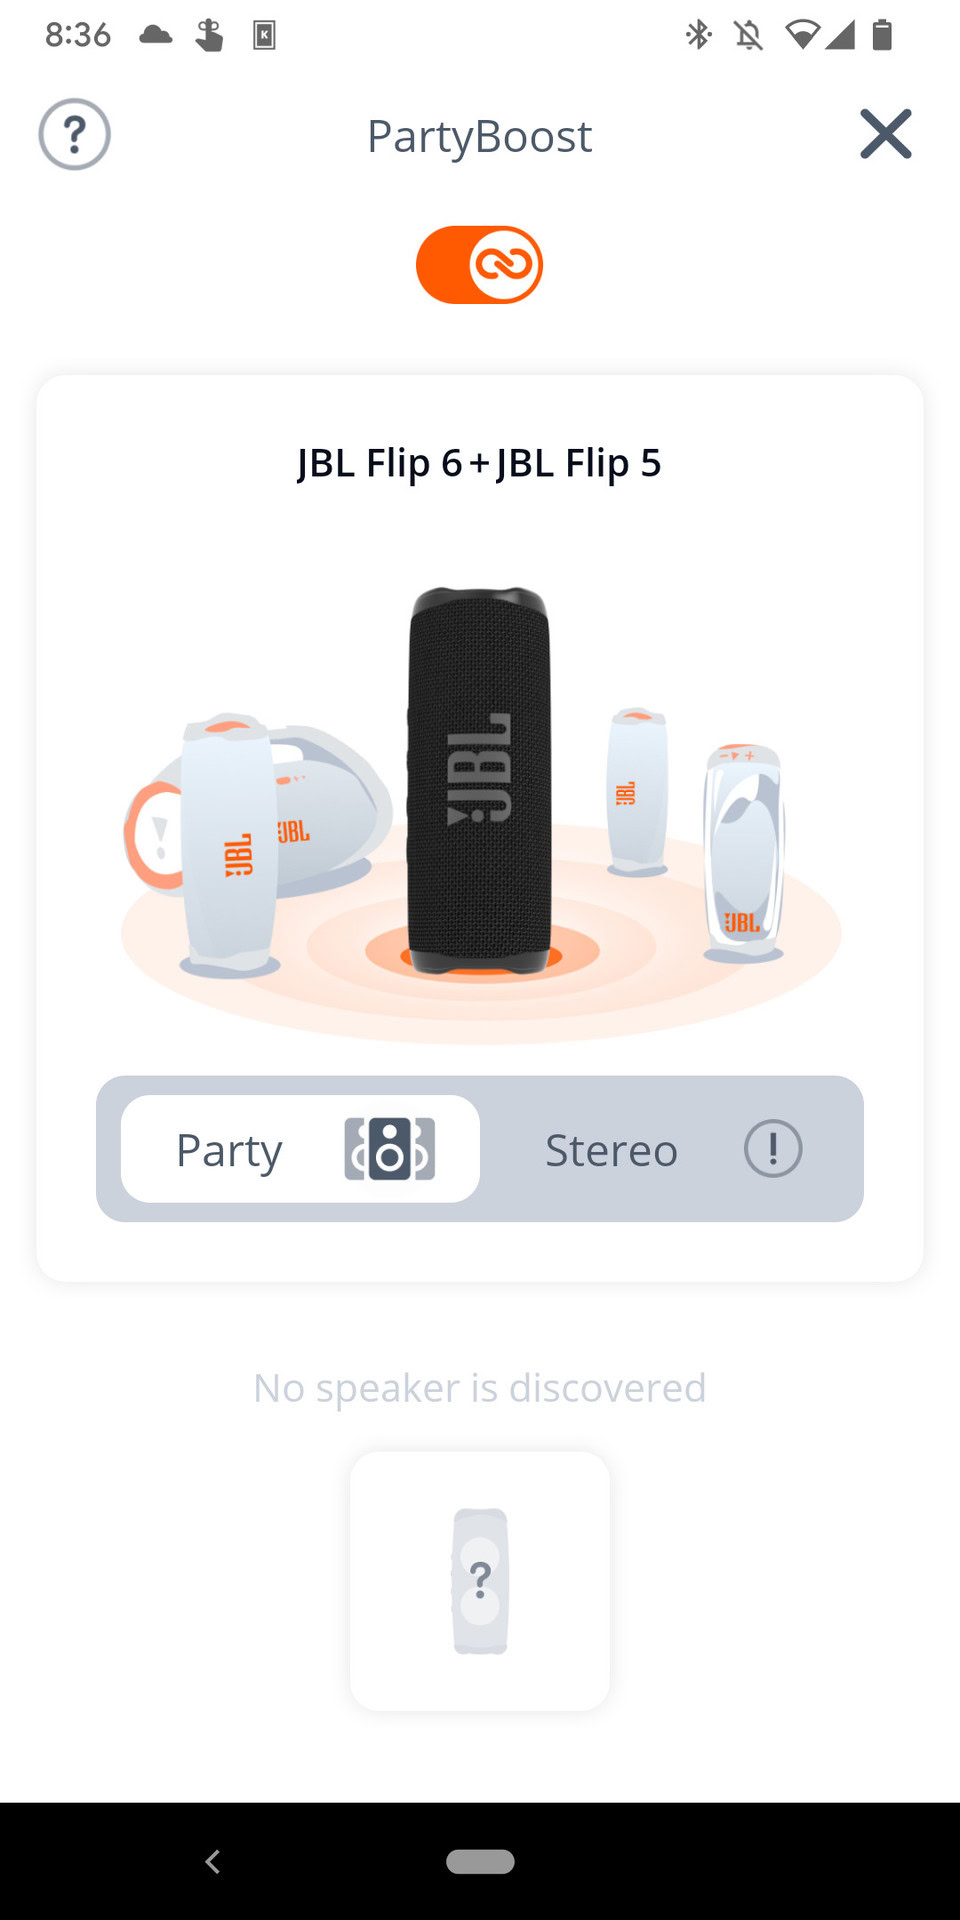 Screenshot of the JBL Portable app after it has been synced to the JBL Flip 6 showing the PartyBoost function.